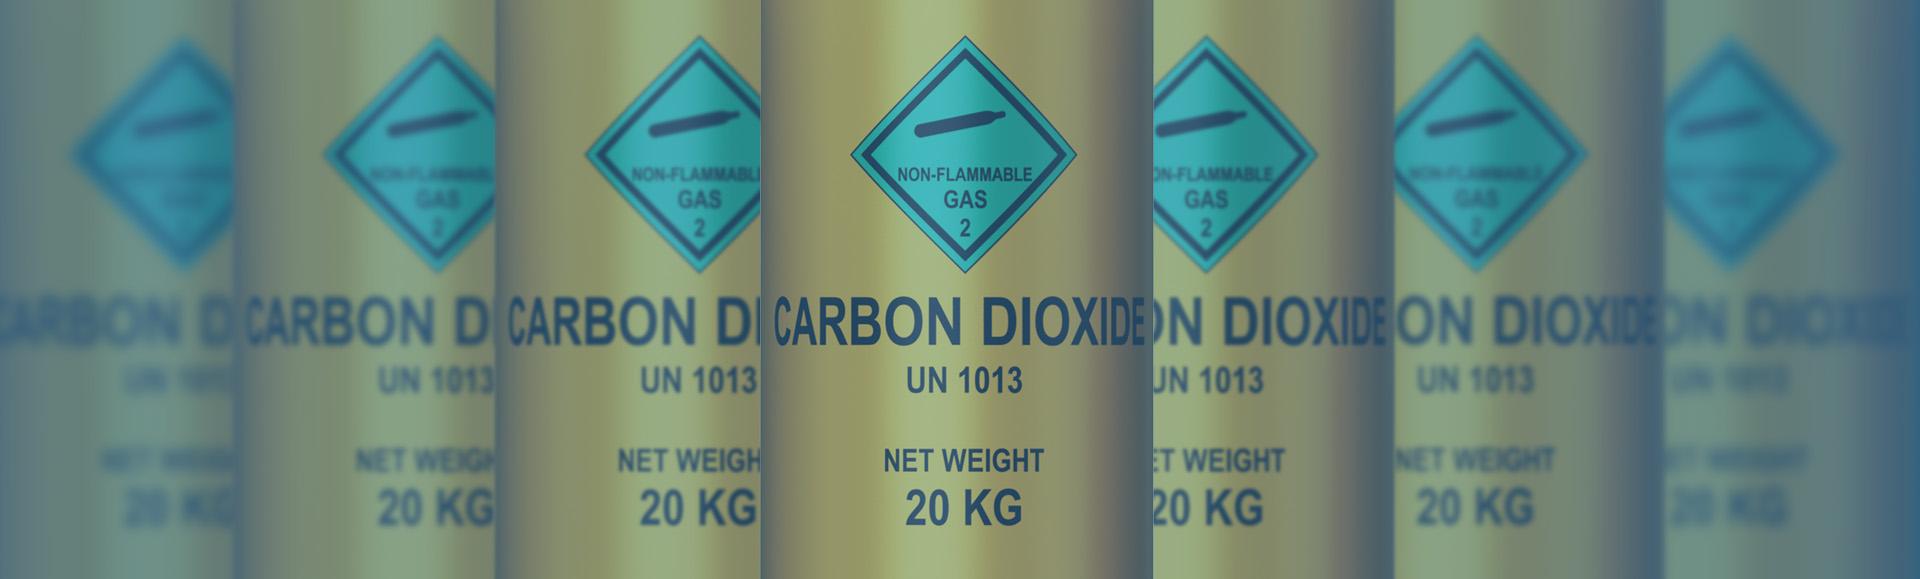 IMG - Buy Co2 Carbon Dioxide Gas Seychelles